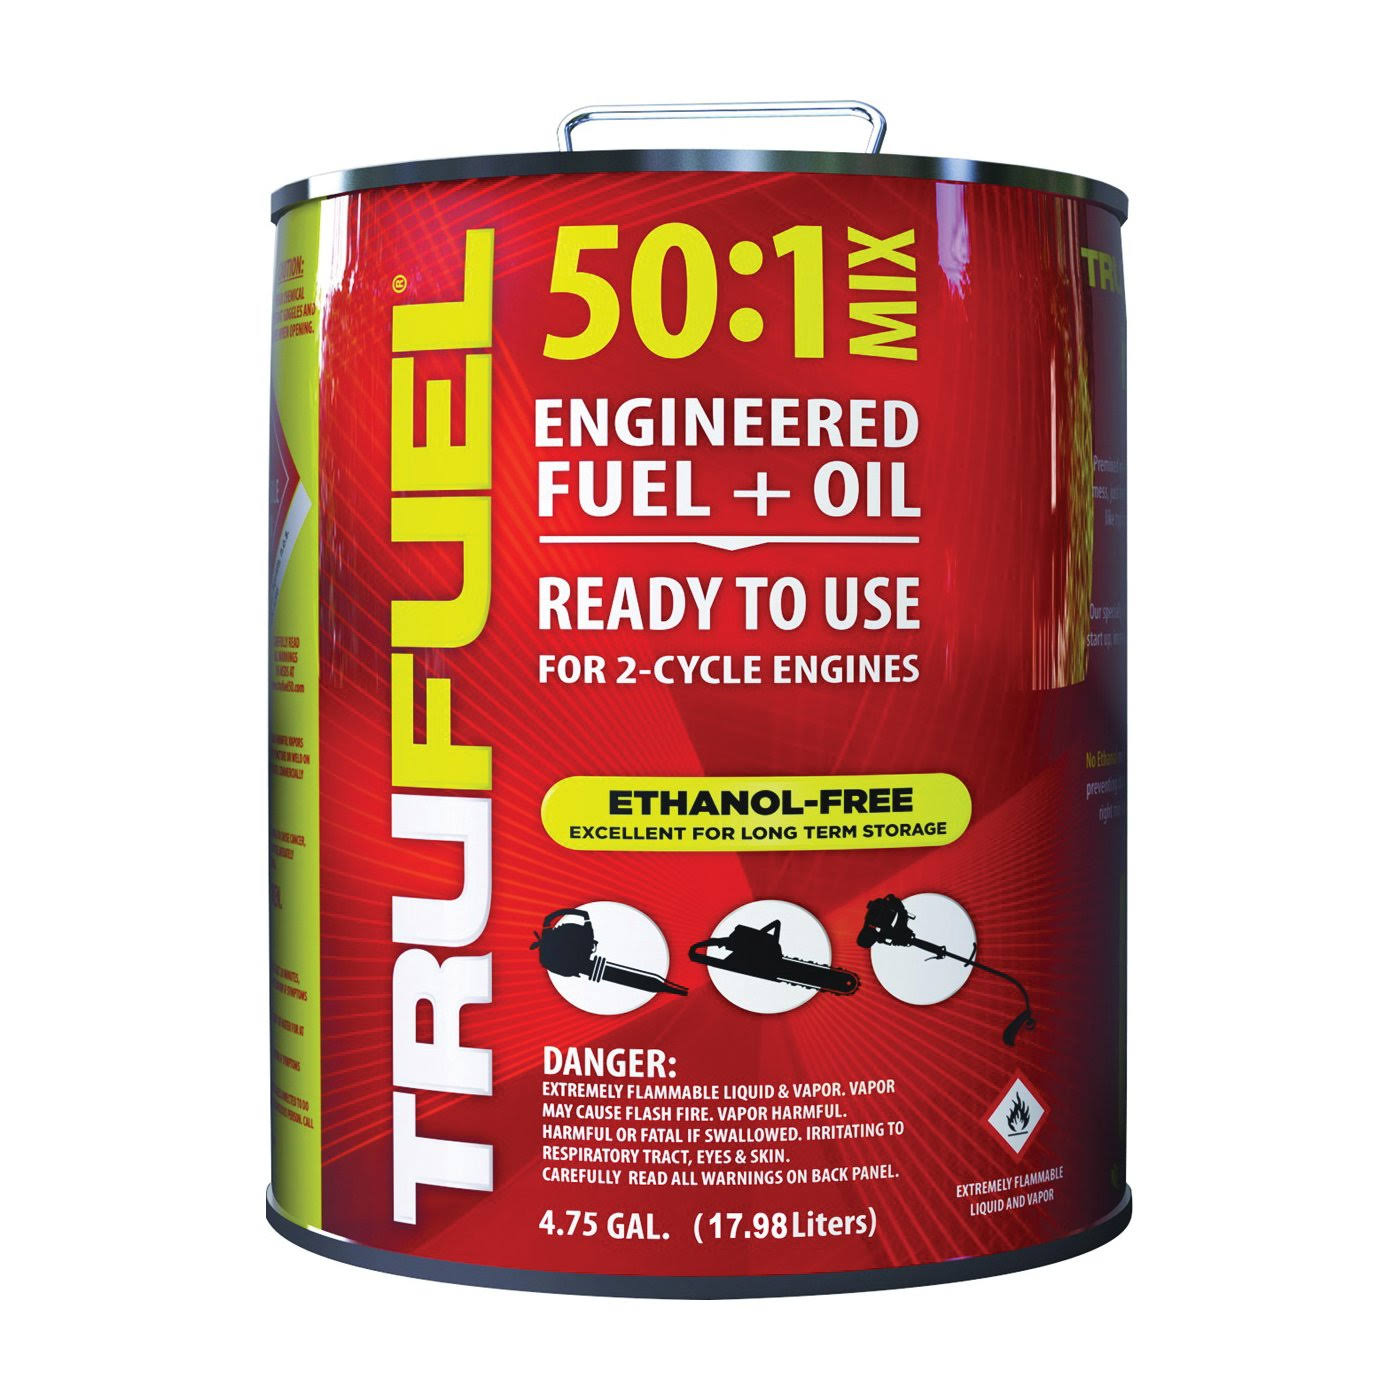 Arnold Fuel 50:1 Mix Engineered Fuel & Oil - 17.98l